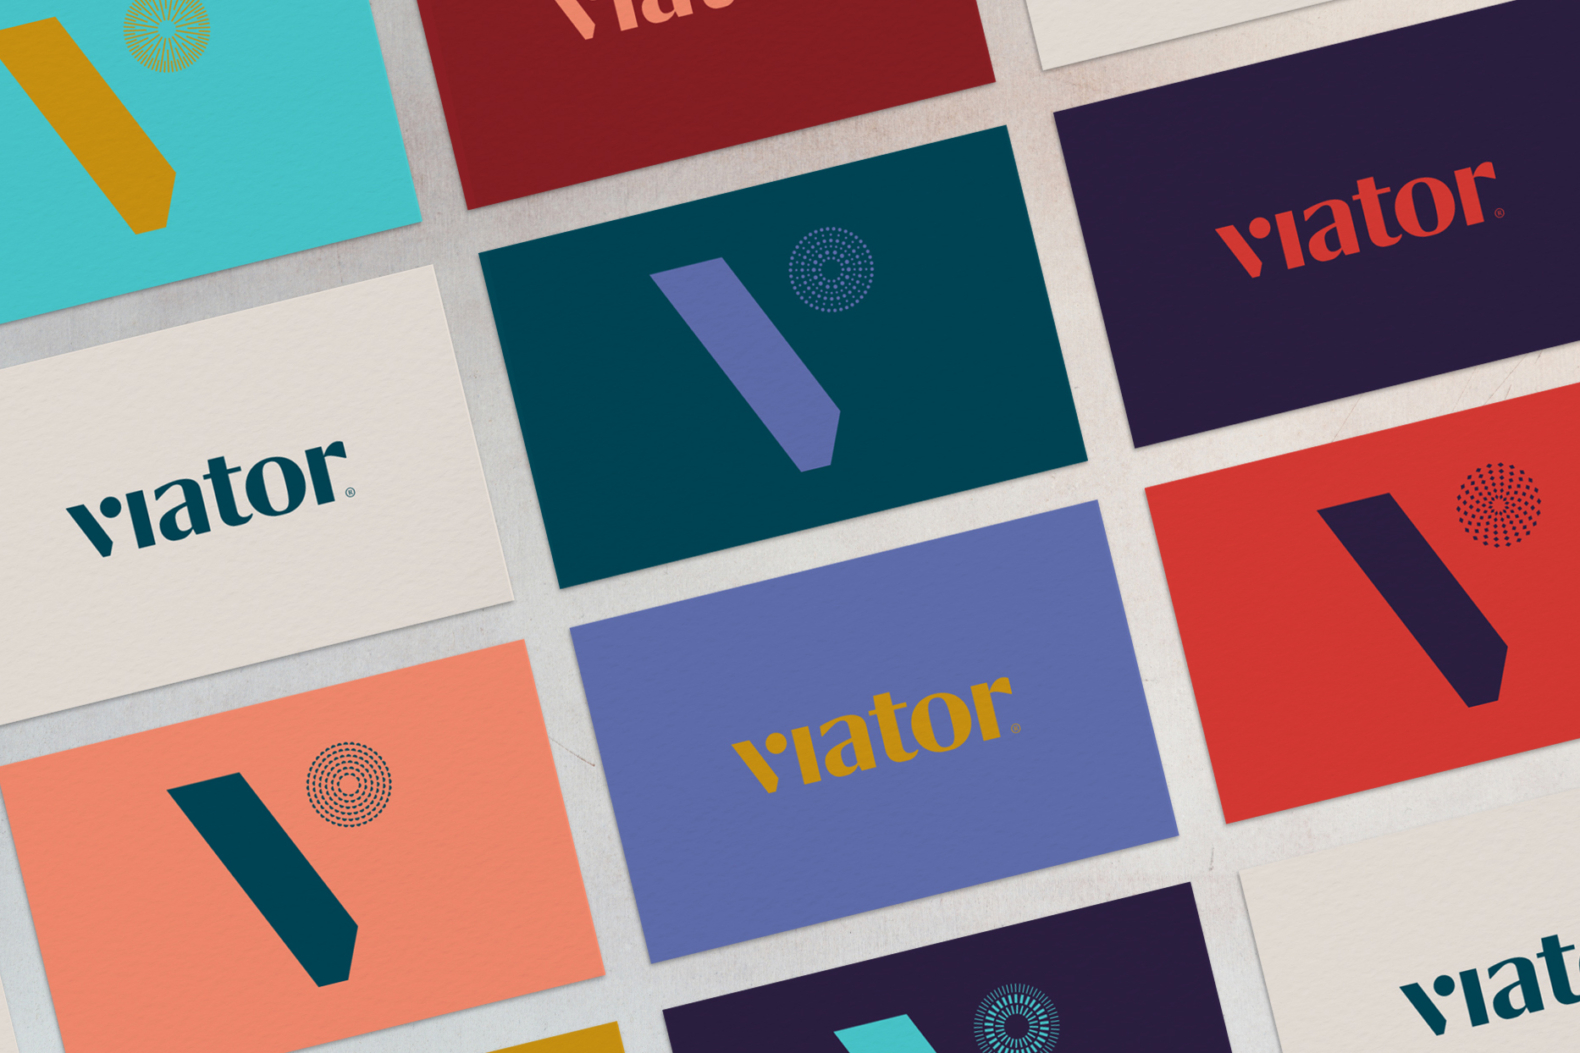 Overhead shot of a variety of Viator business cards. The shot demonstrates the range of the new Viator color palette and the brand’s new logo. Colors of the palette include gray, teal, periwinkle, salmon, eggplant, turquoise, scarlet and coral.